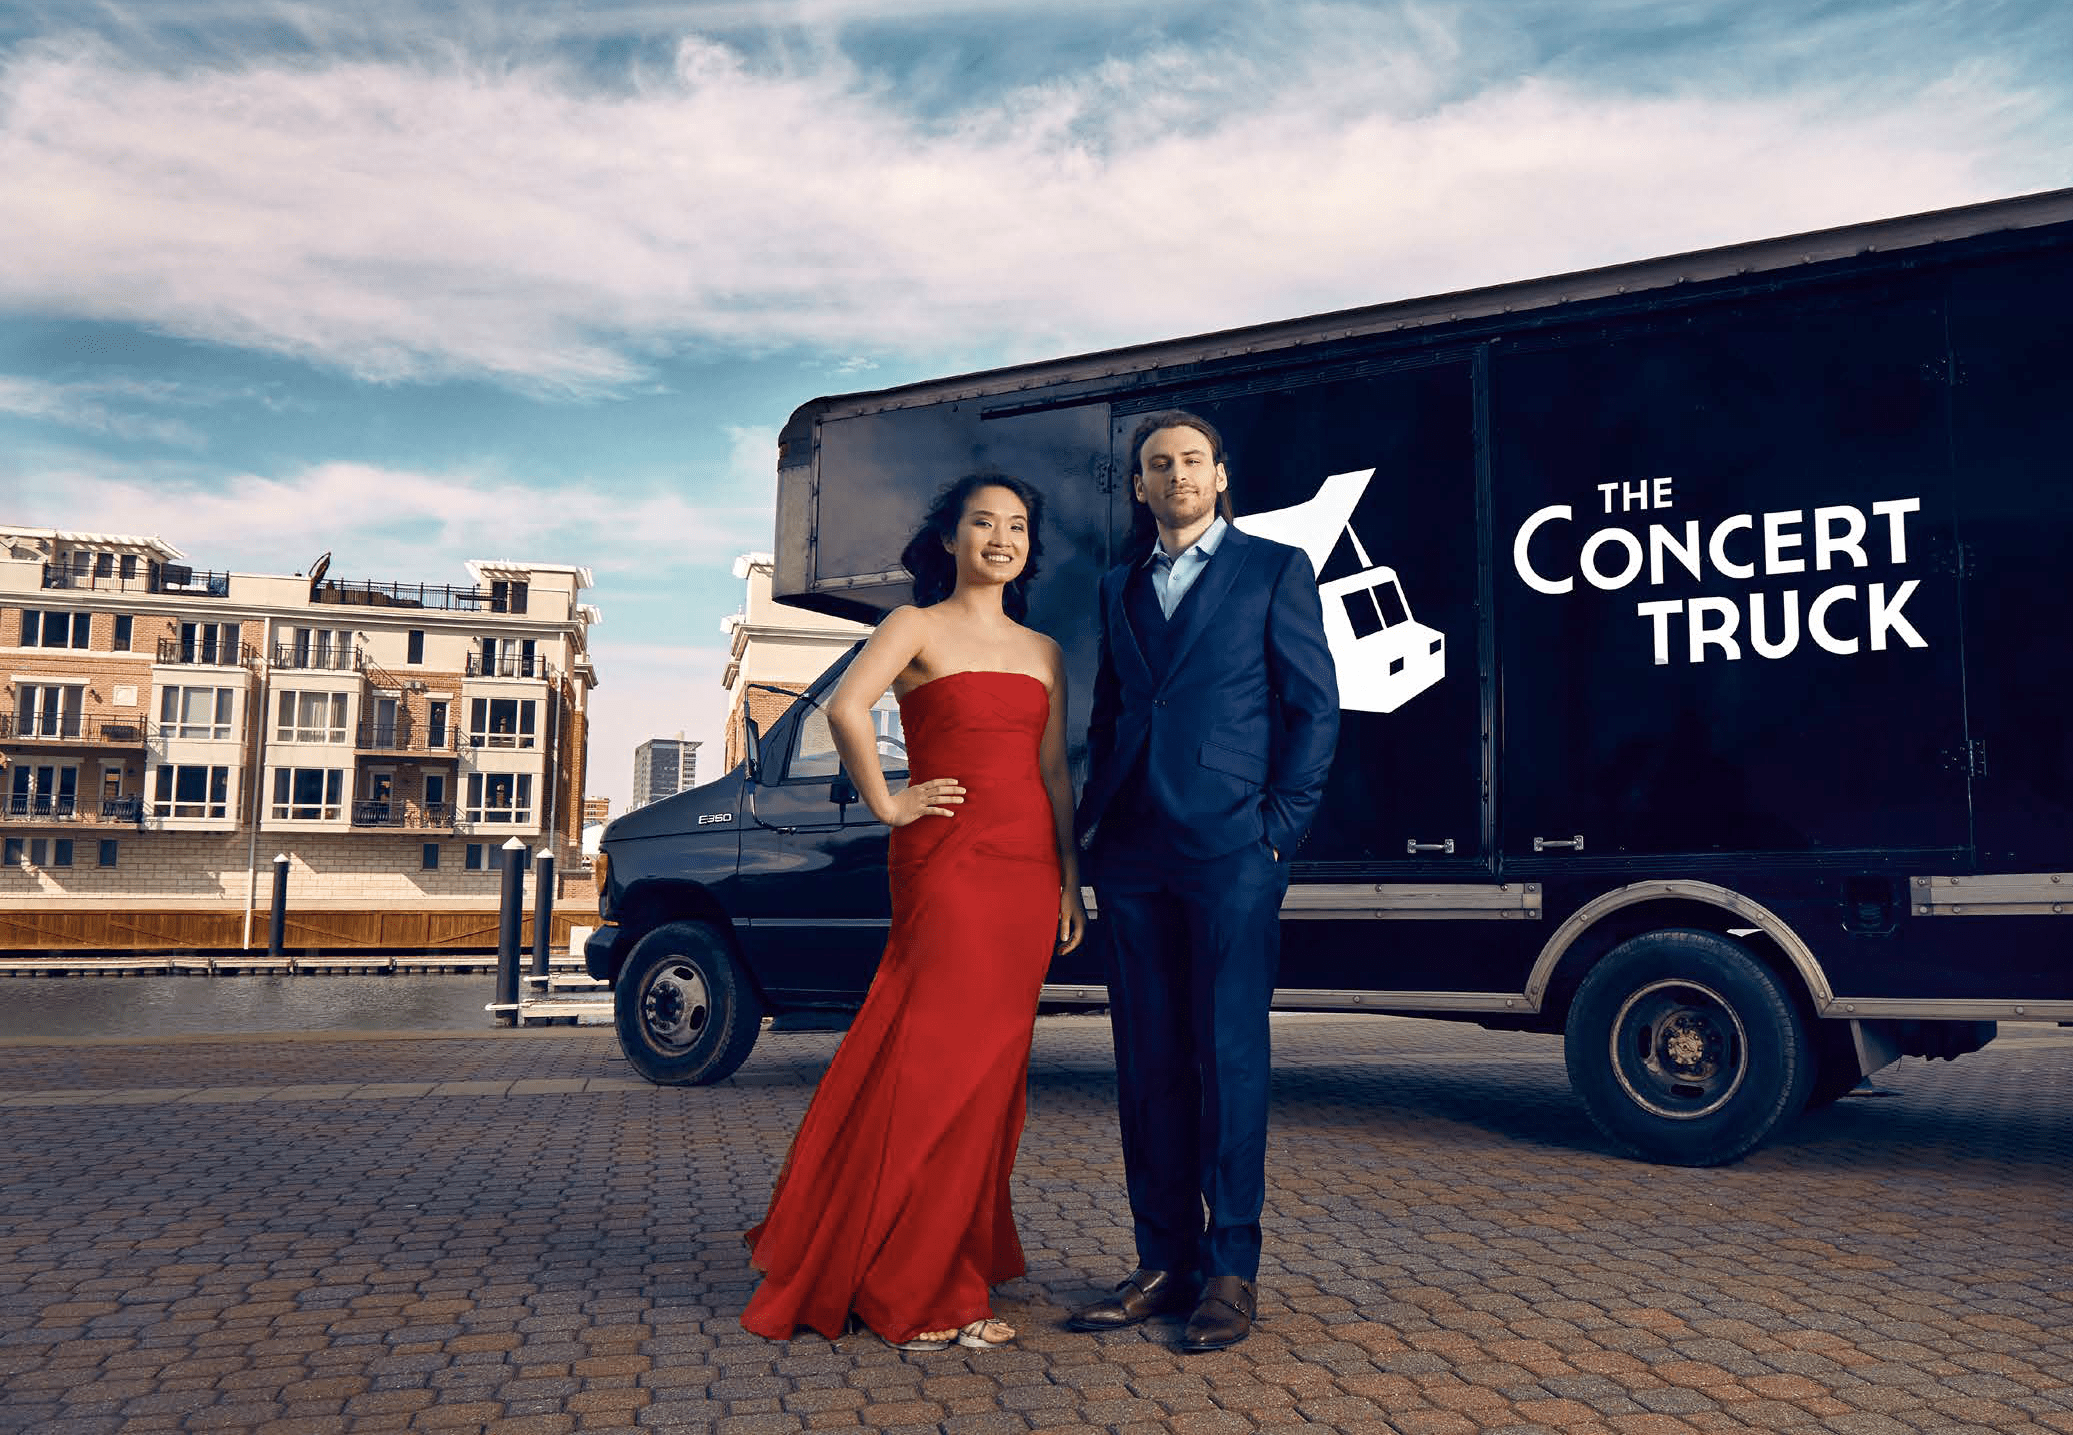 A woman in a red designer dress and a man in a tux stand in front of a 16' truck with the words The Concert Truck labeled on its sides.